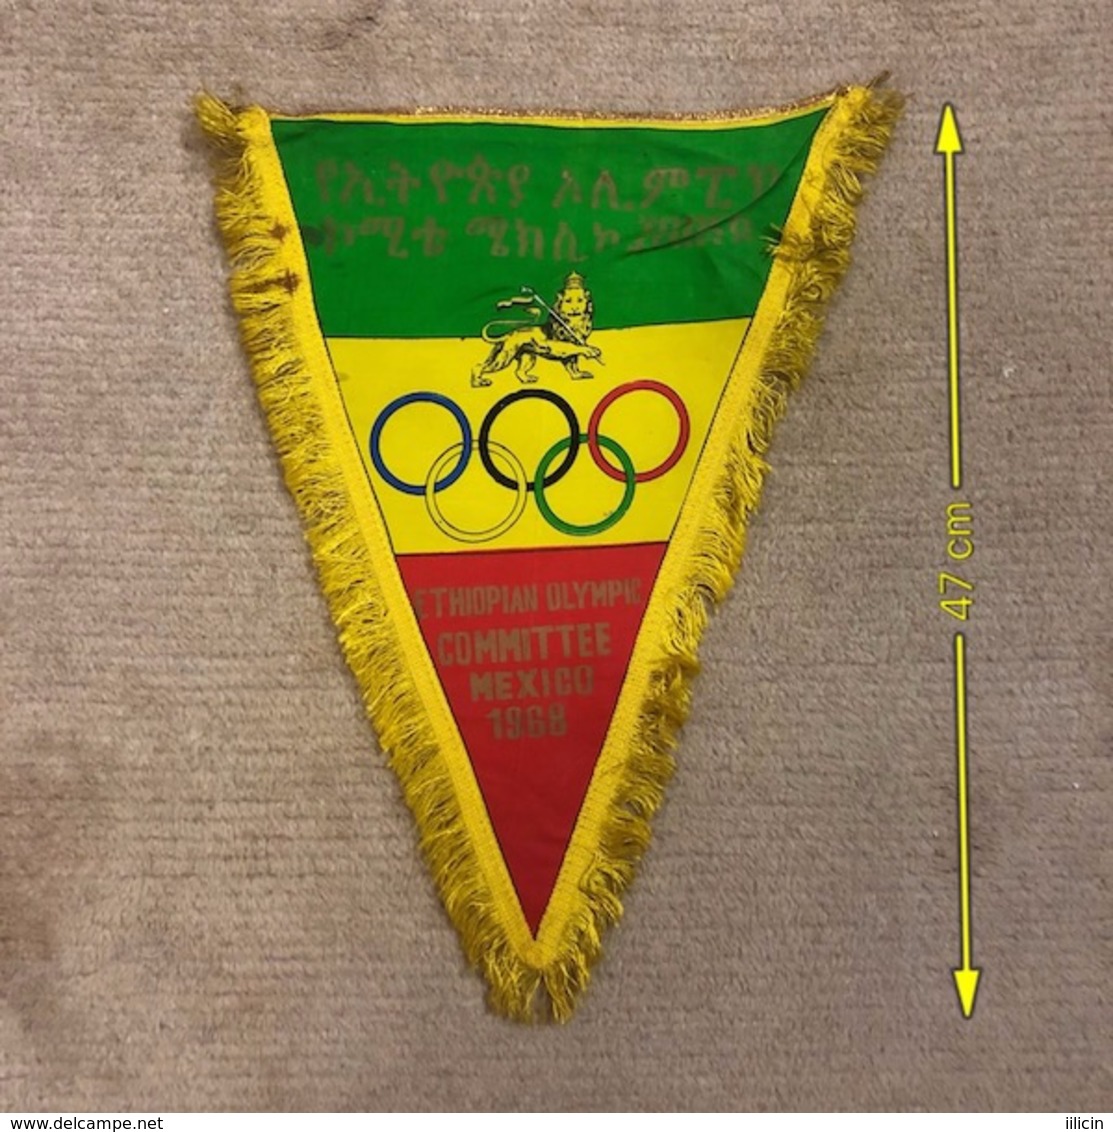 Flag Pennant Banderín ZA000496 - Olympics Mexico City 1968 Ethiopia National Committee NOC - Apparel, Souvenirs & Other